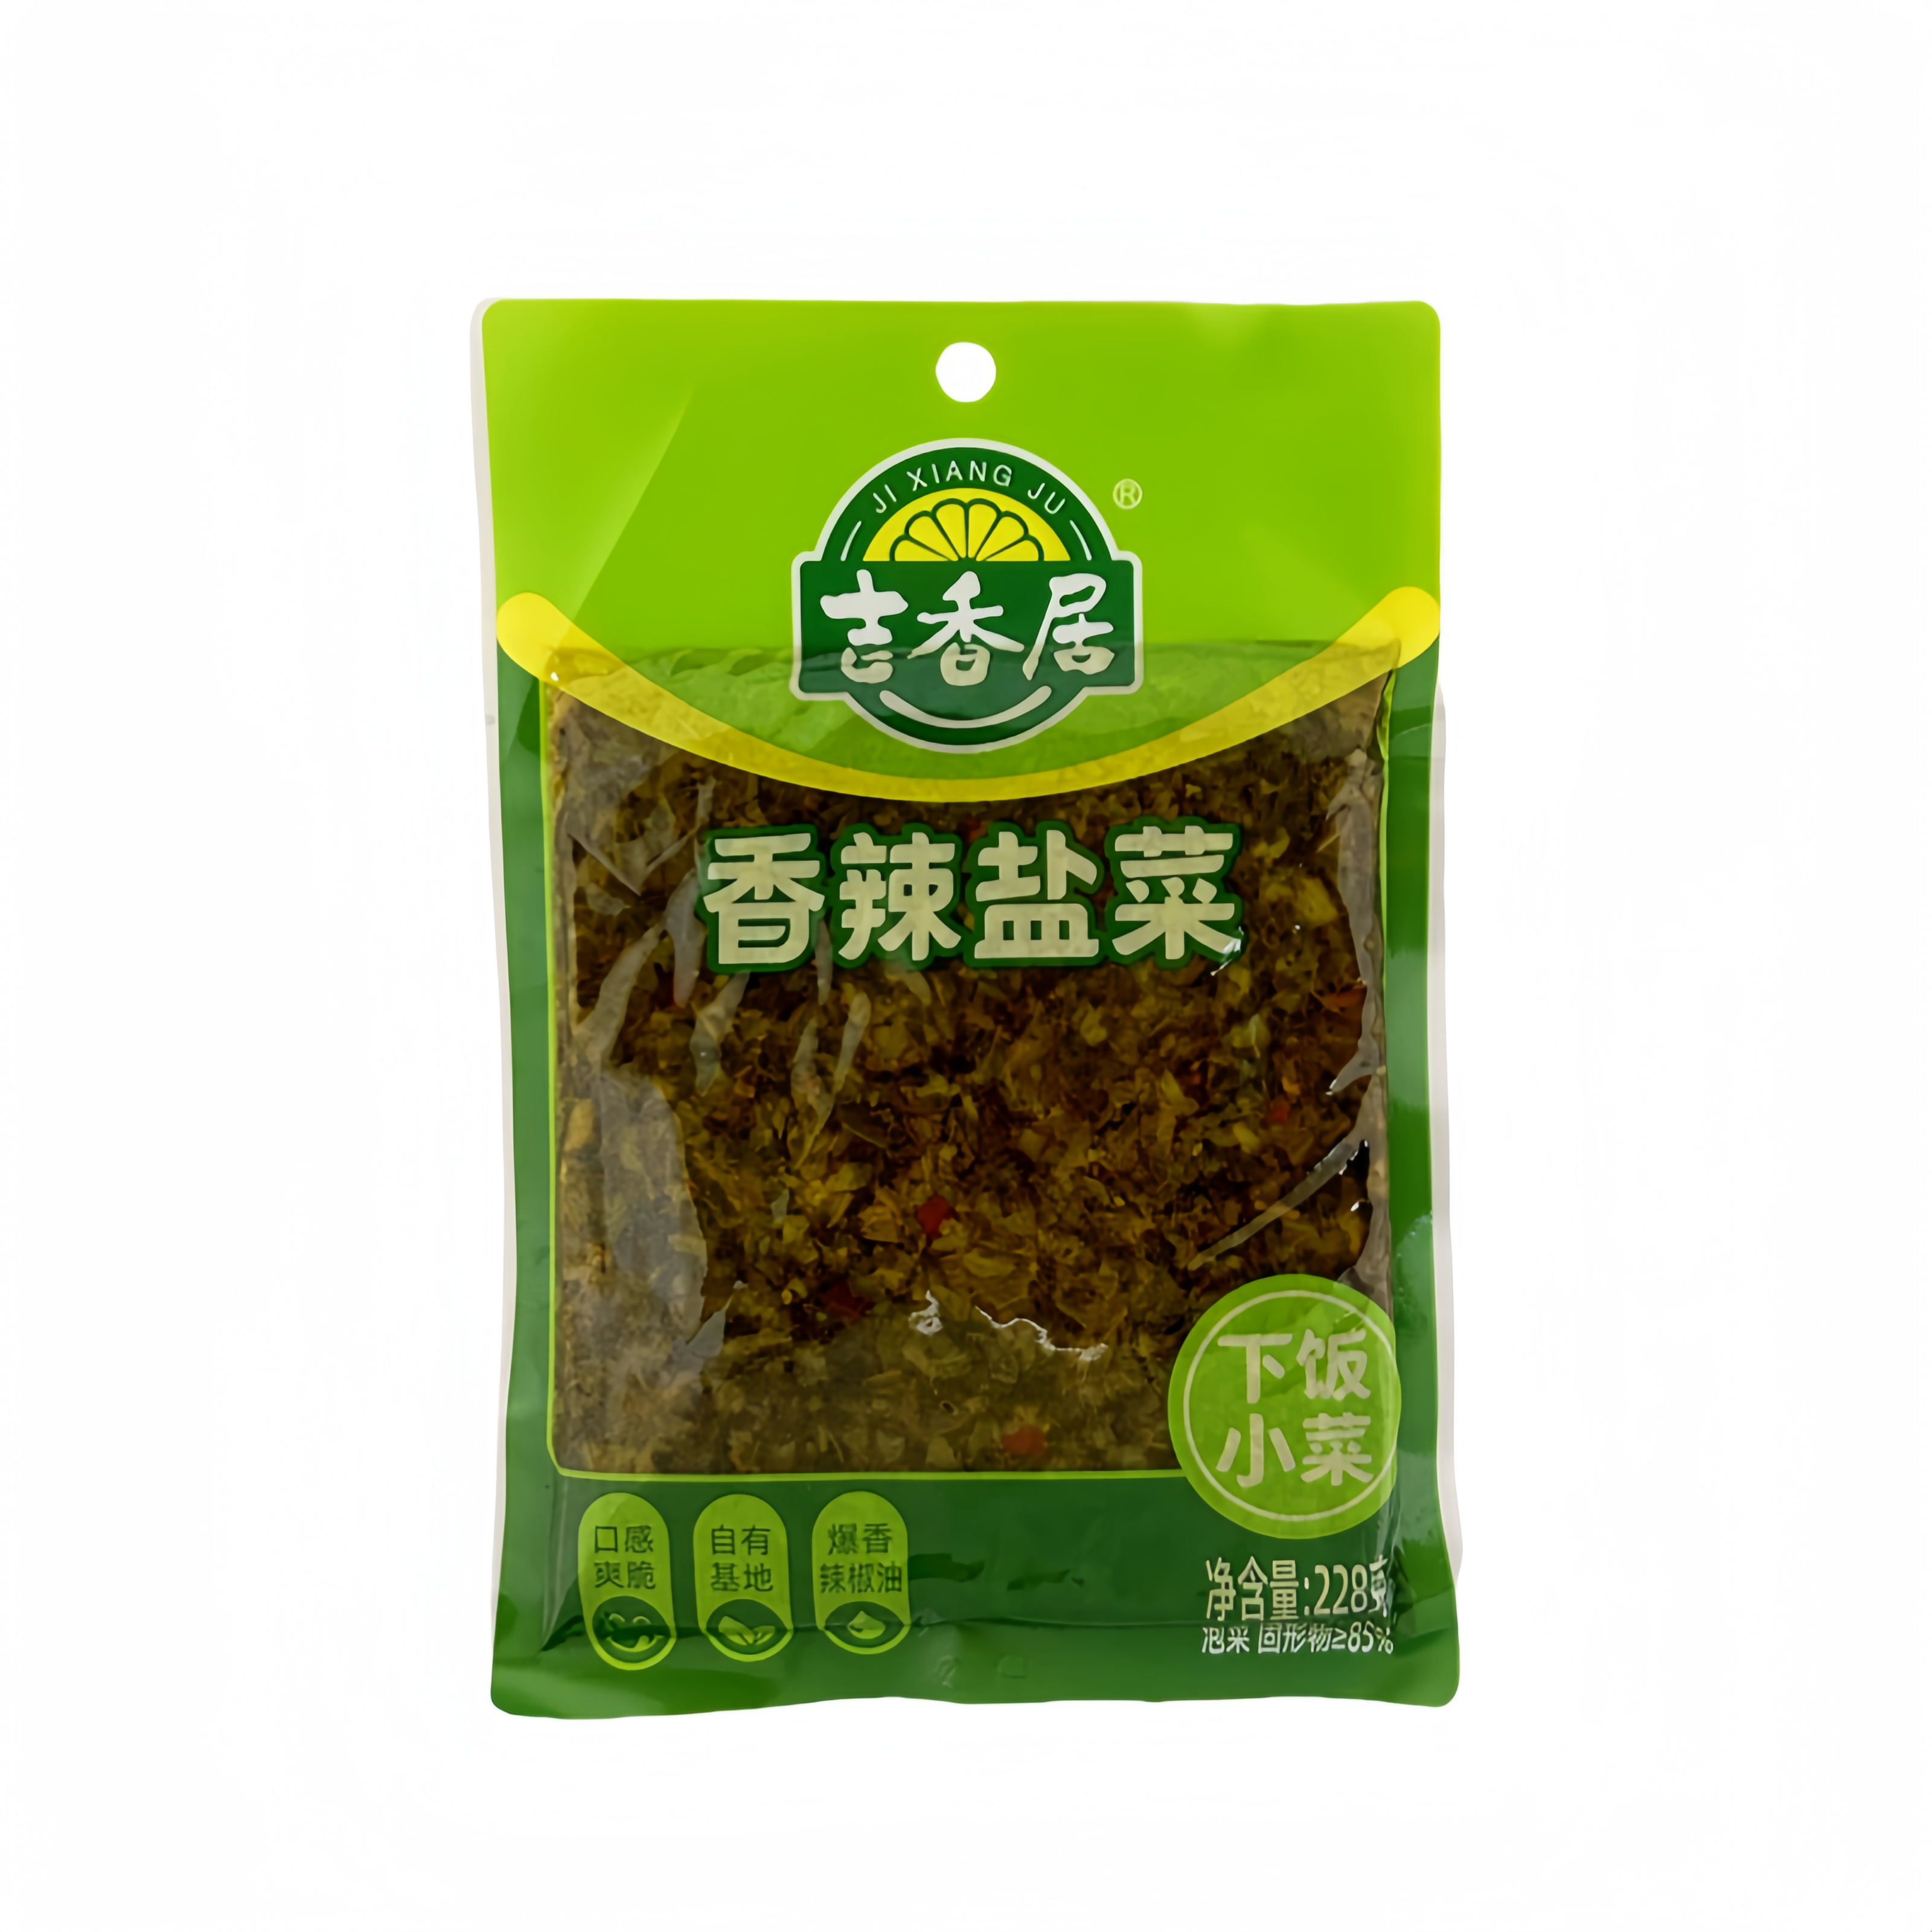 Mixed Vegetables With Spicy Flavour 228g XLYC Ji Xiang Ju China